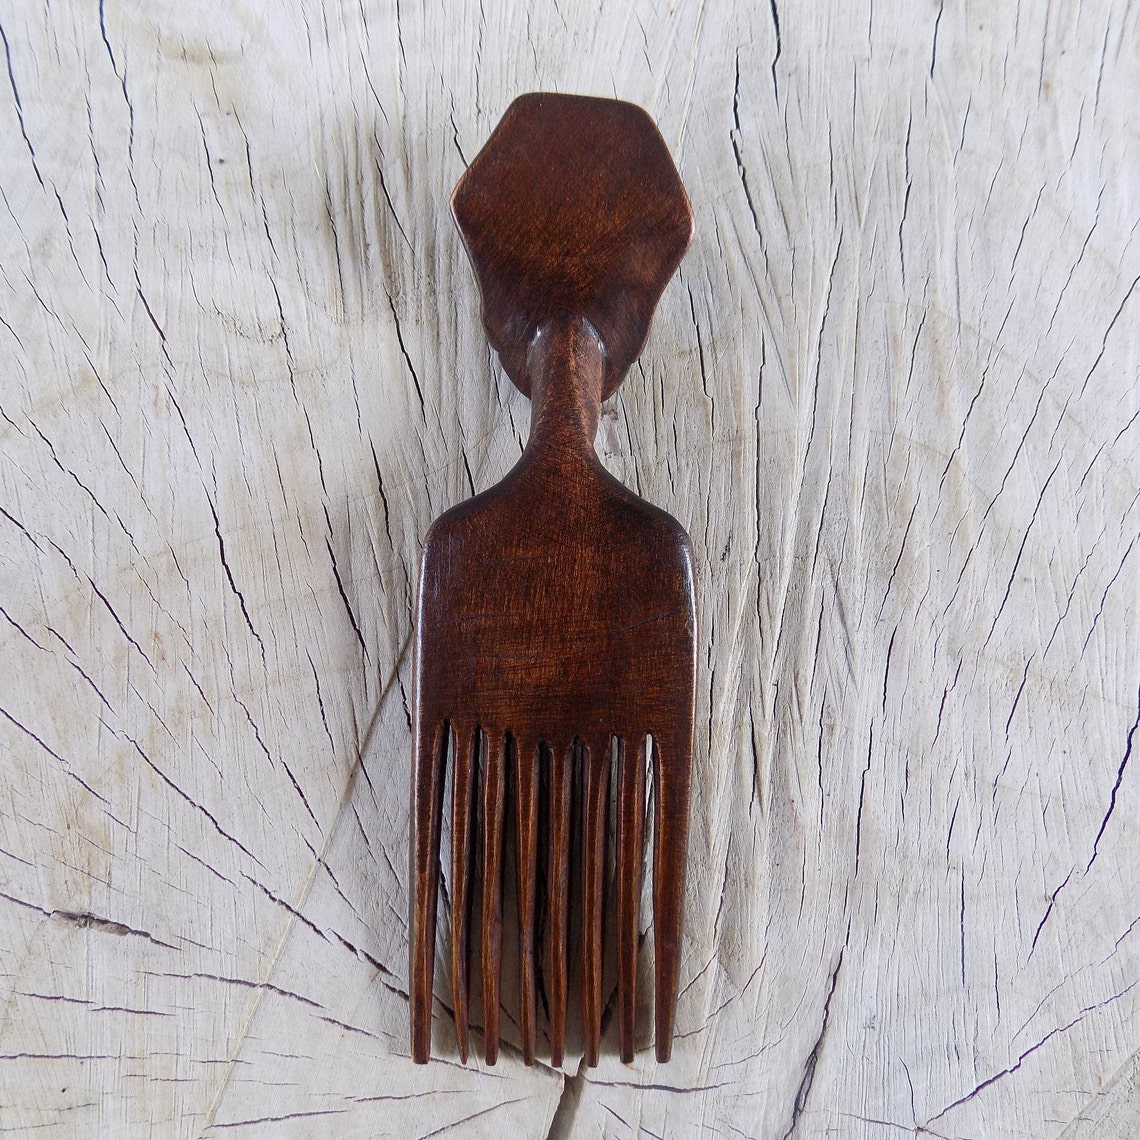 Afro Comb Afro Pick Wooden Comb African Wooden Comb | Etsy